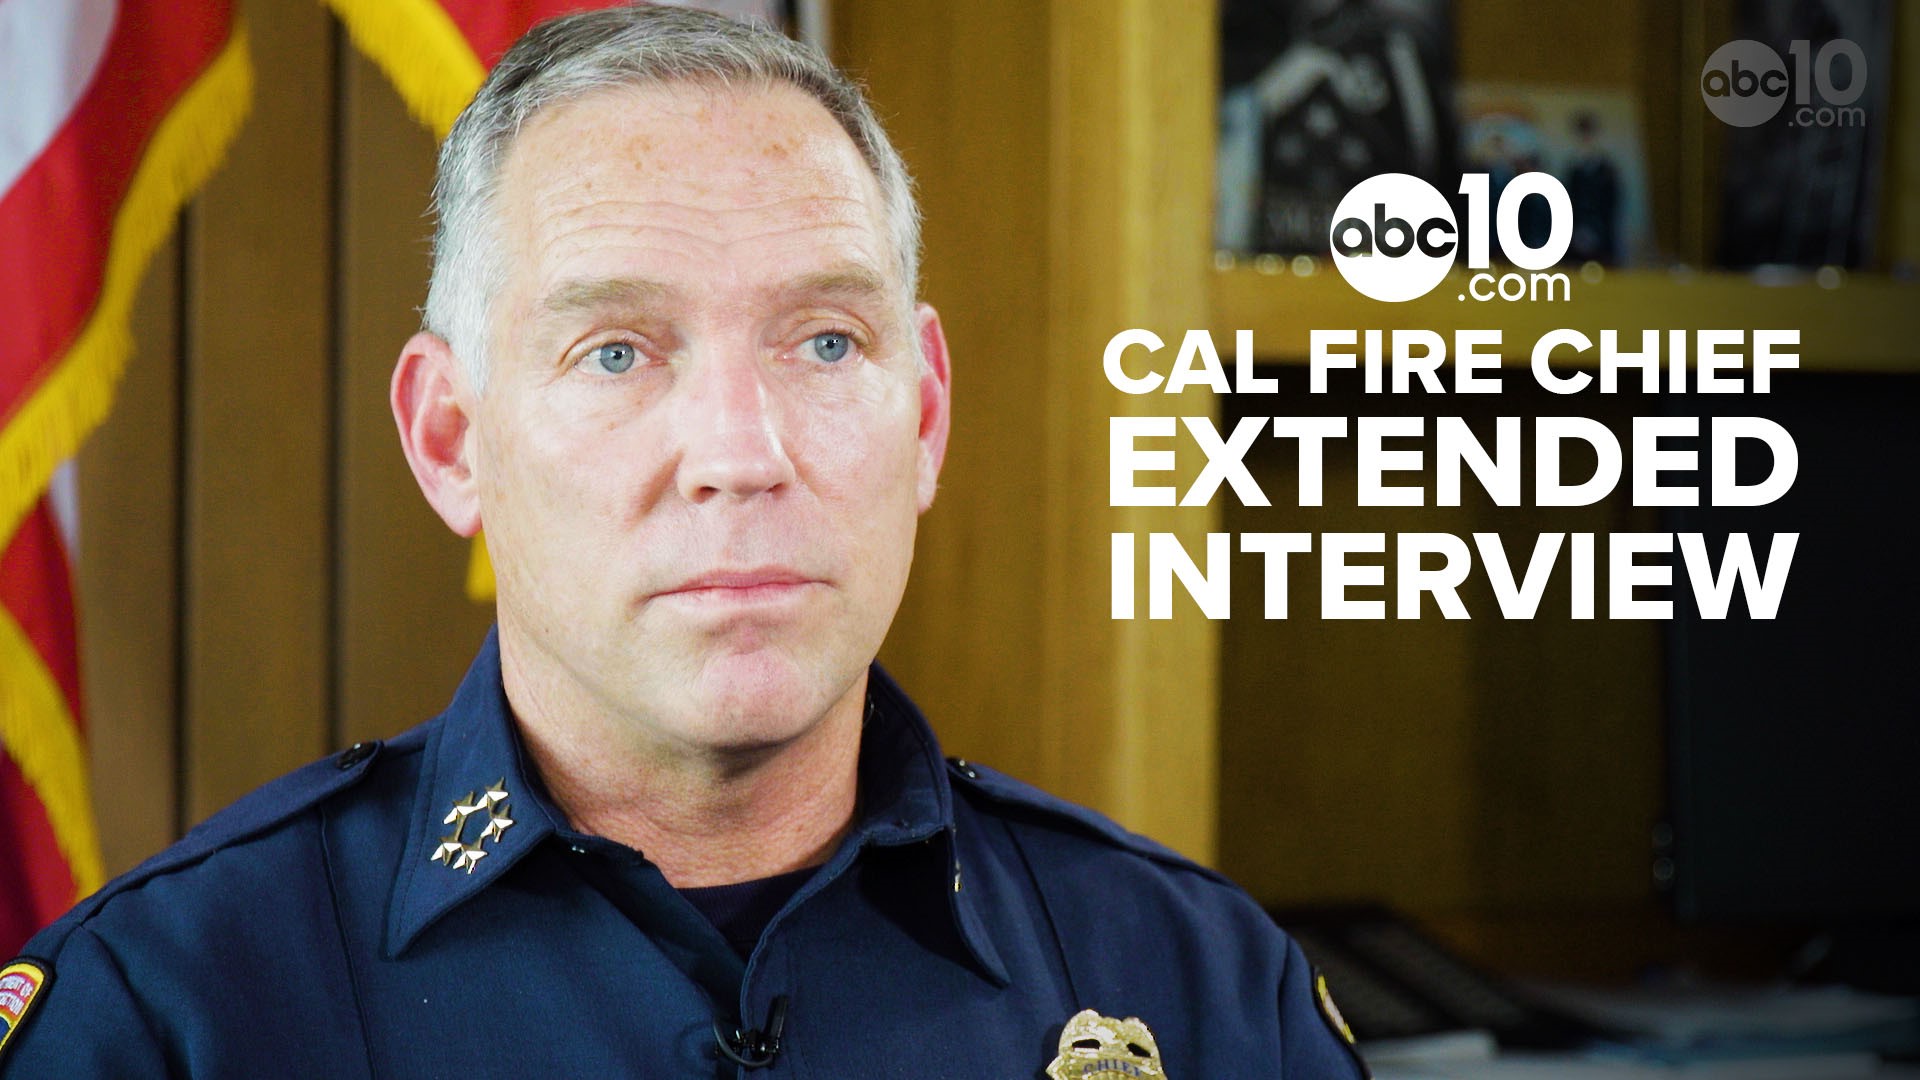 New CAL FIRE chief, Thom Porter shares his views on PG&E, fire danger and the need to tackle millions of acres of overgrown forests in California.